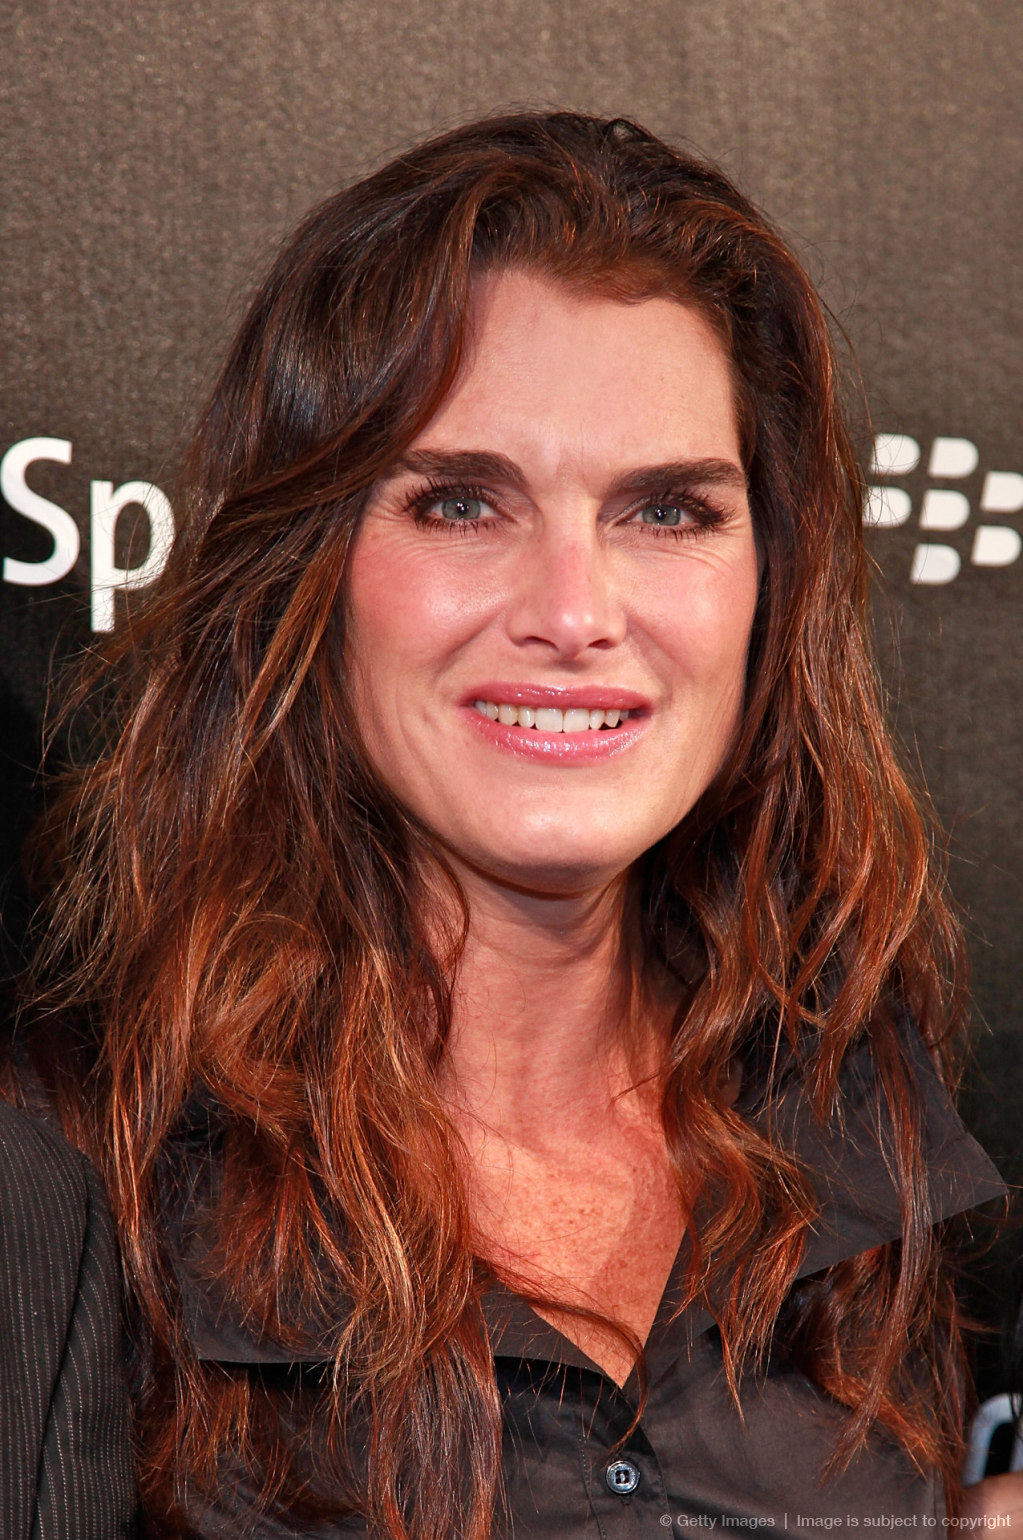 How tall is Brooke Shields?